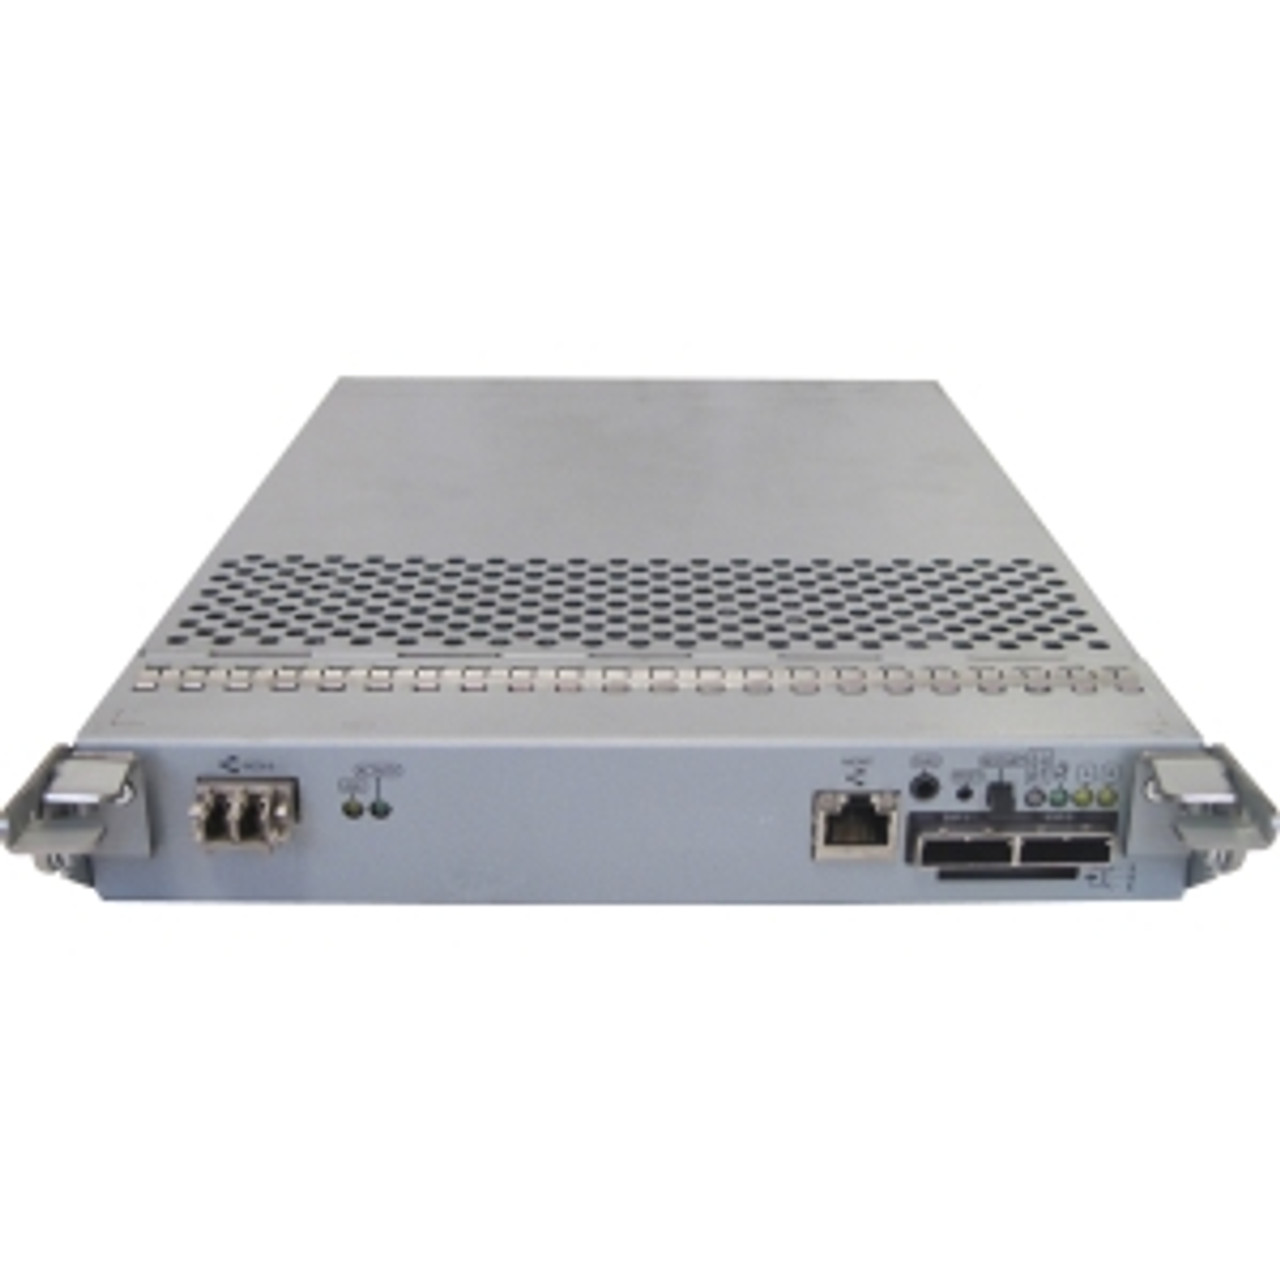 DSN-540 D-Link xStack Storage 1x10GbE Secondary iSCSI SAN Controller for DSN-5410-10 (Refurbished)